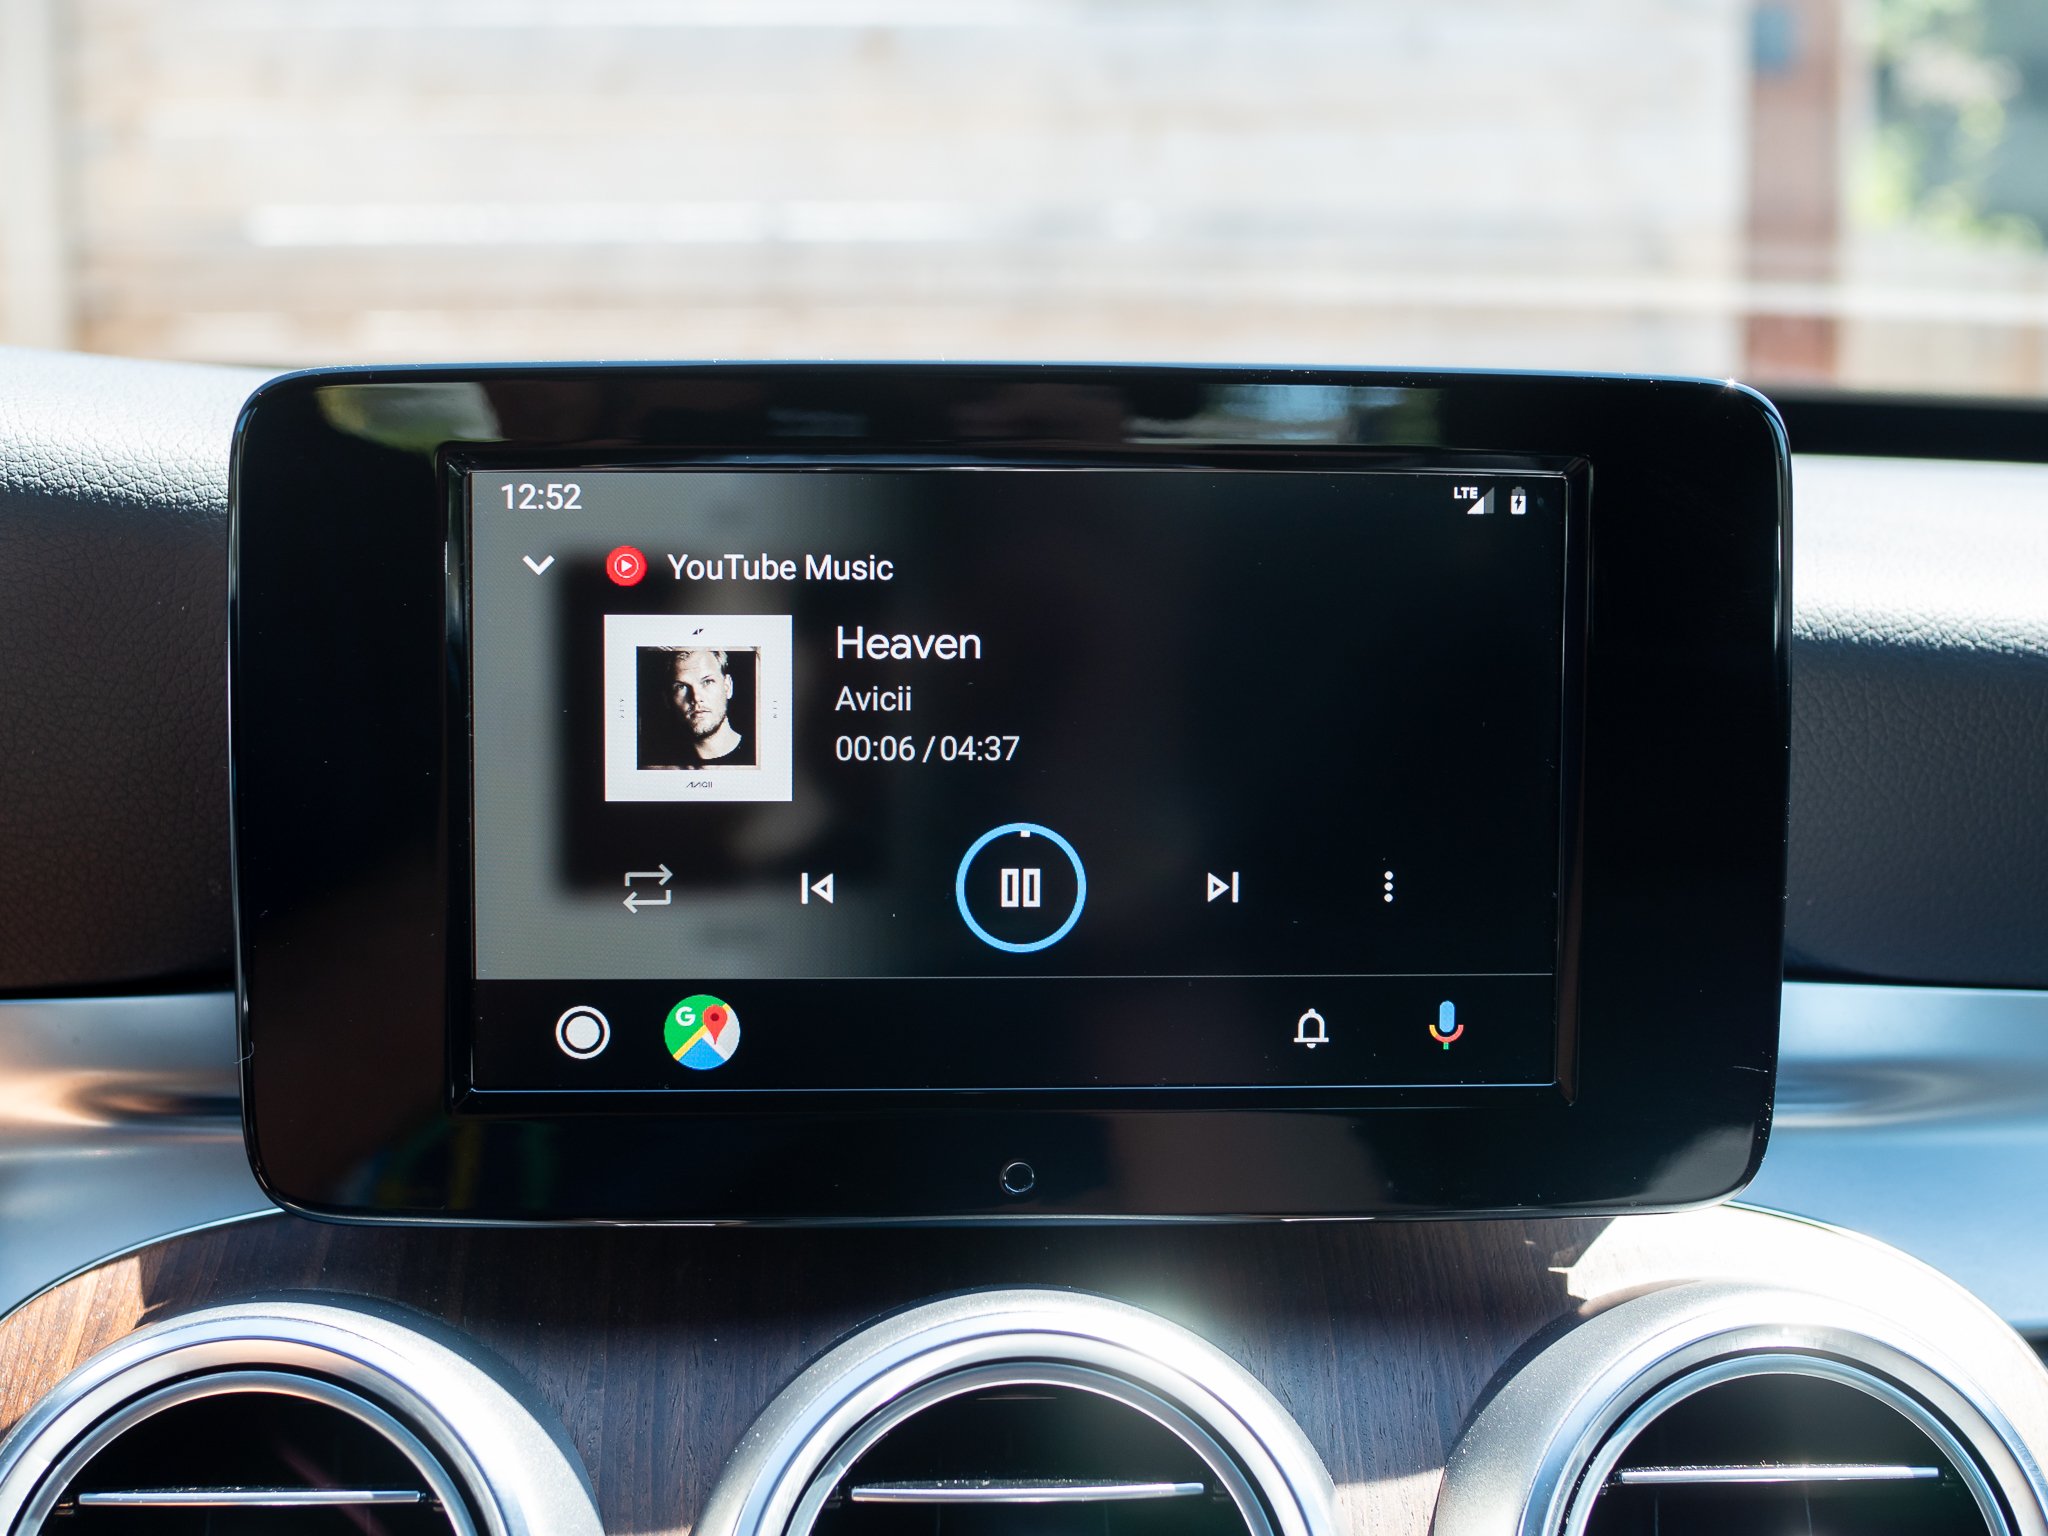 https://www.androidcentral.com/sites/androidcentral.com/files/styles/large_wm_brw/public/article_images/2019/07/new-android-auto-youtube-music-playing.jpg?itok=F-vYDM8P